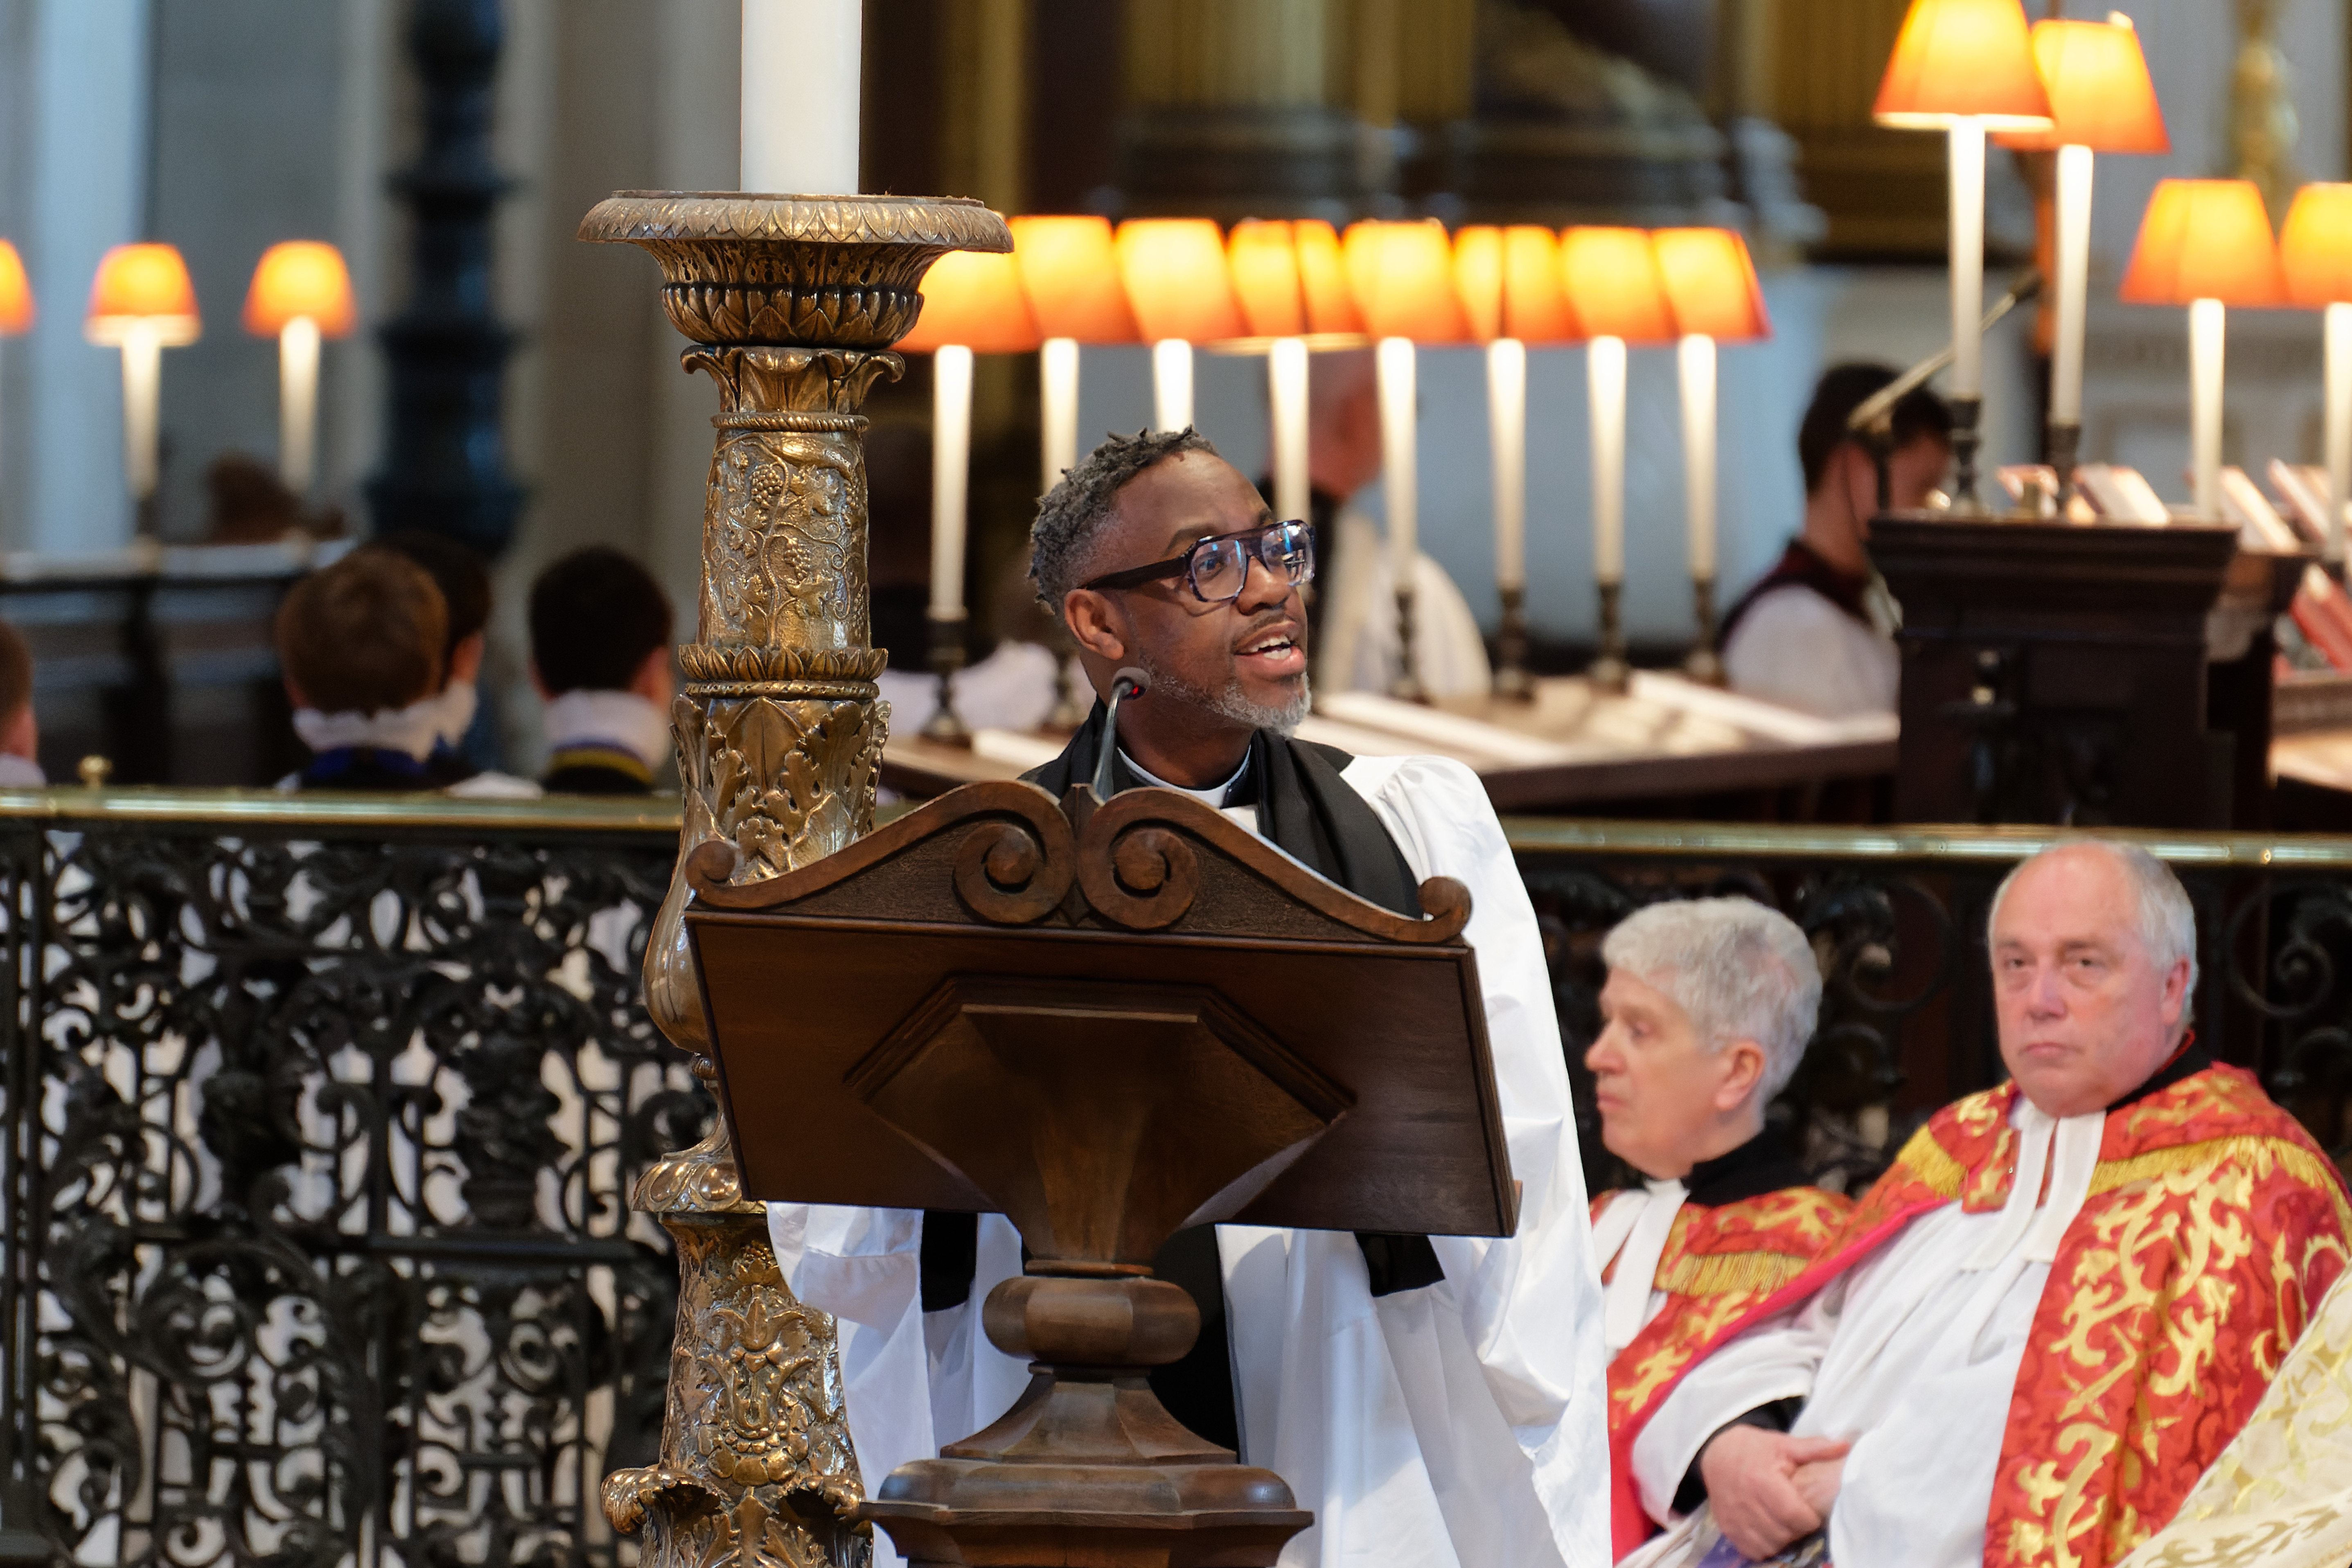 The Revd Azariah France-Williams, standing at a lectern and delivering a lesson.